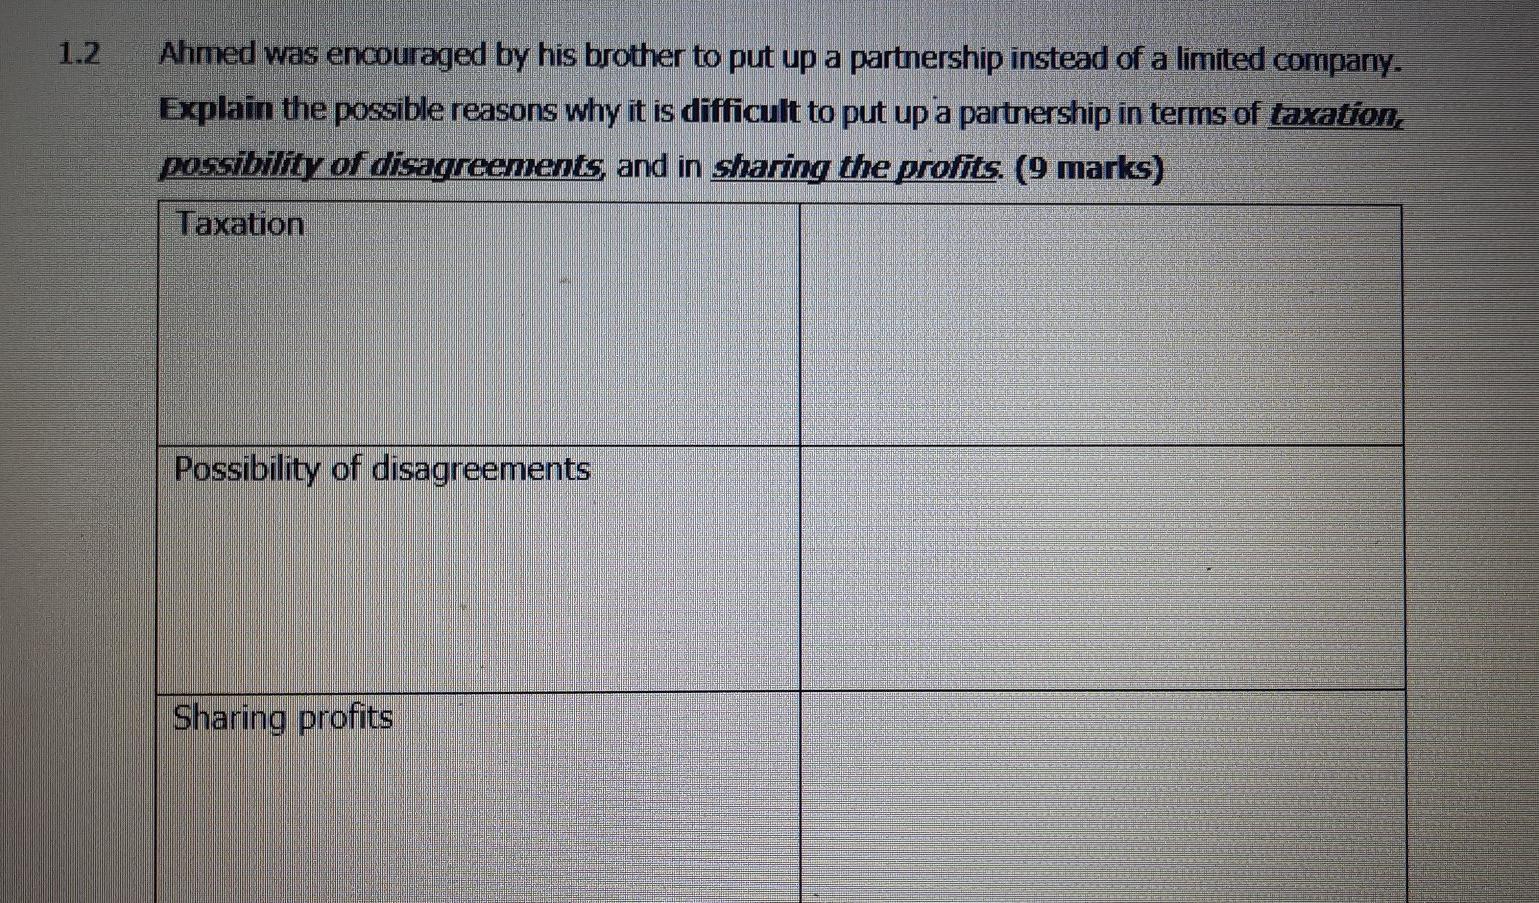 1.2 Ahmed was encouraged by his brother to put up a partnership instead of a limited company. Explain the possible reasons wh